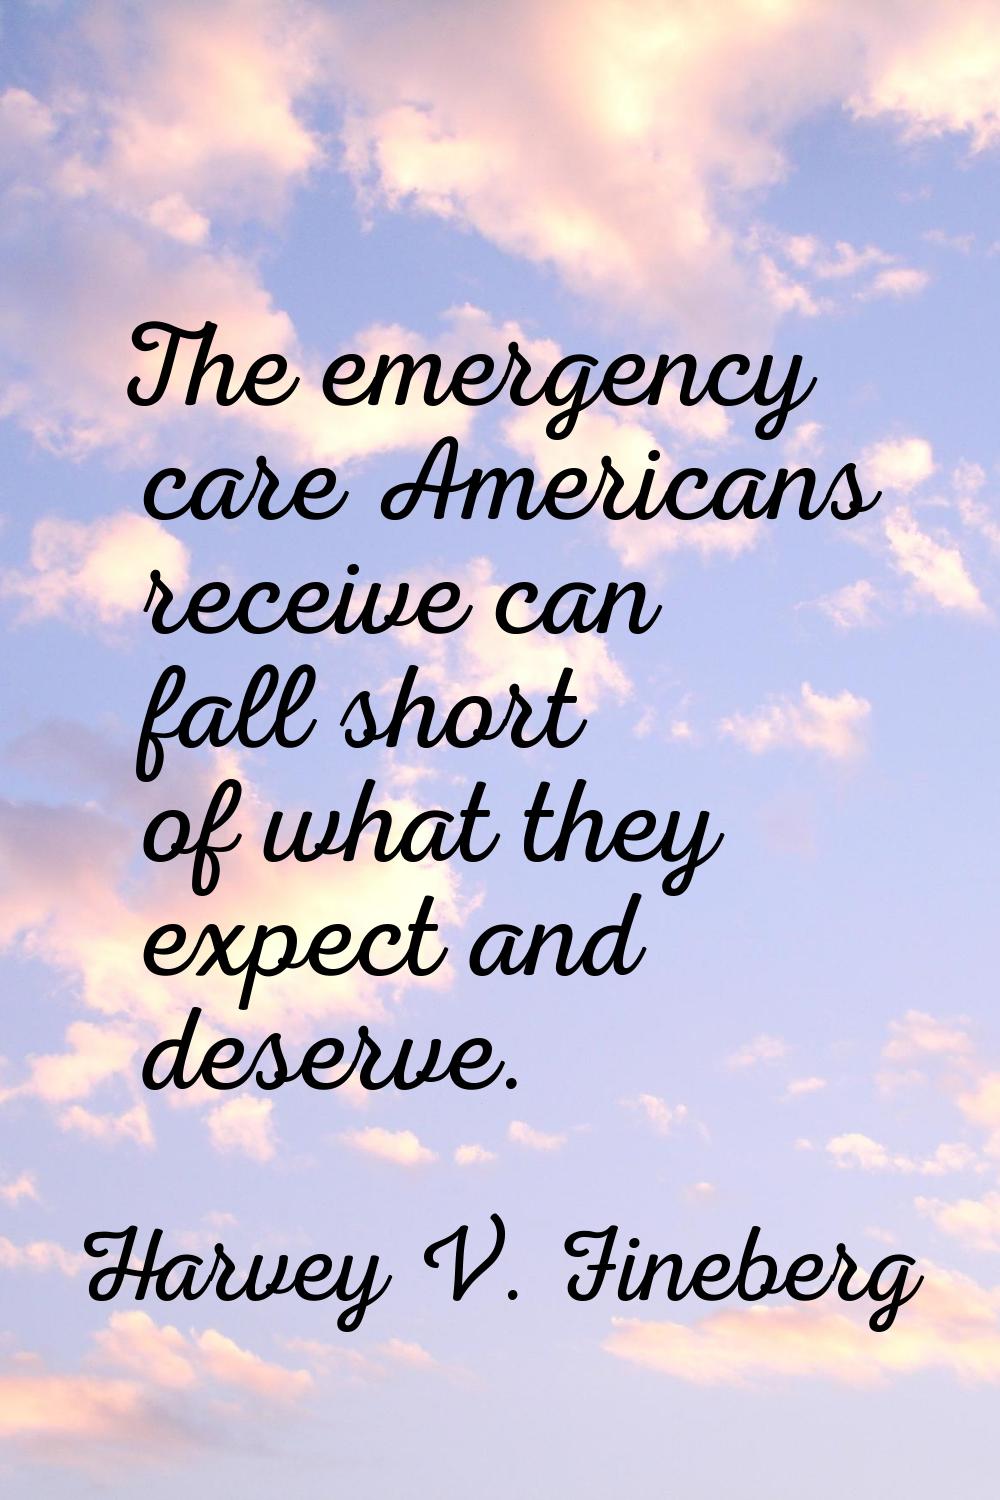 The emergency care Americans receive can fall short of what they expect and deserve.